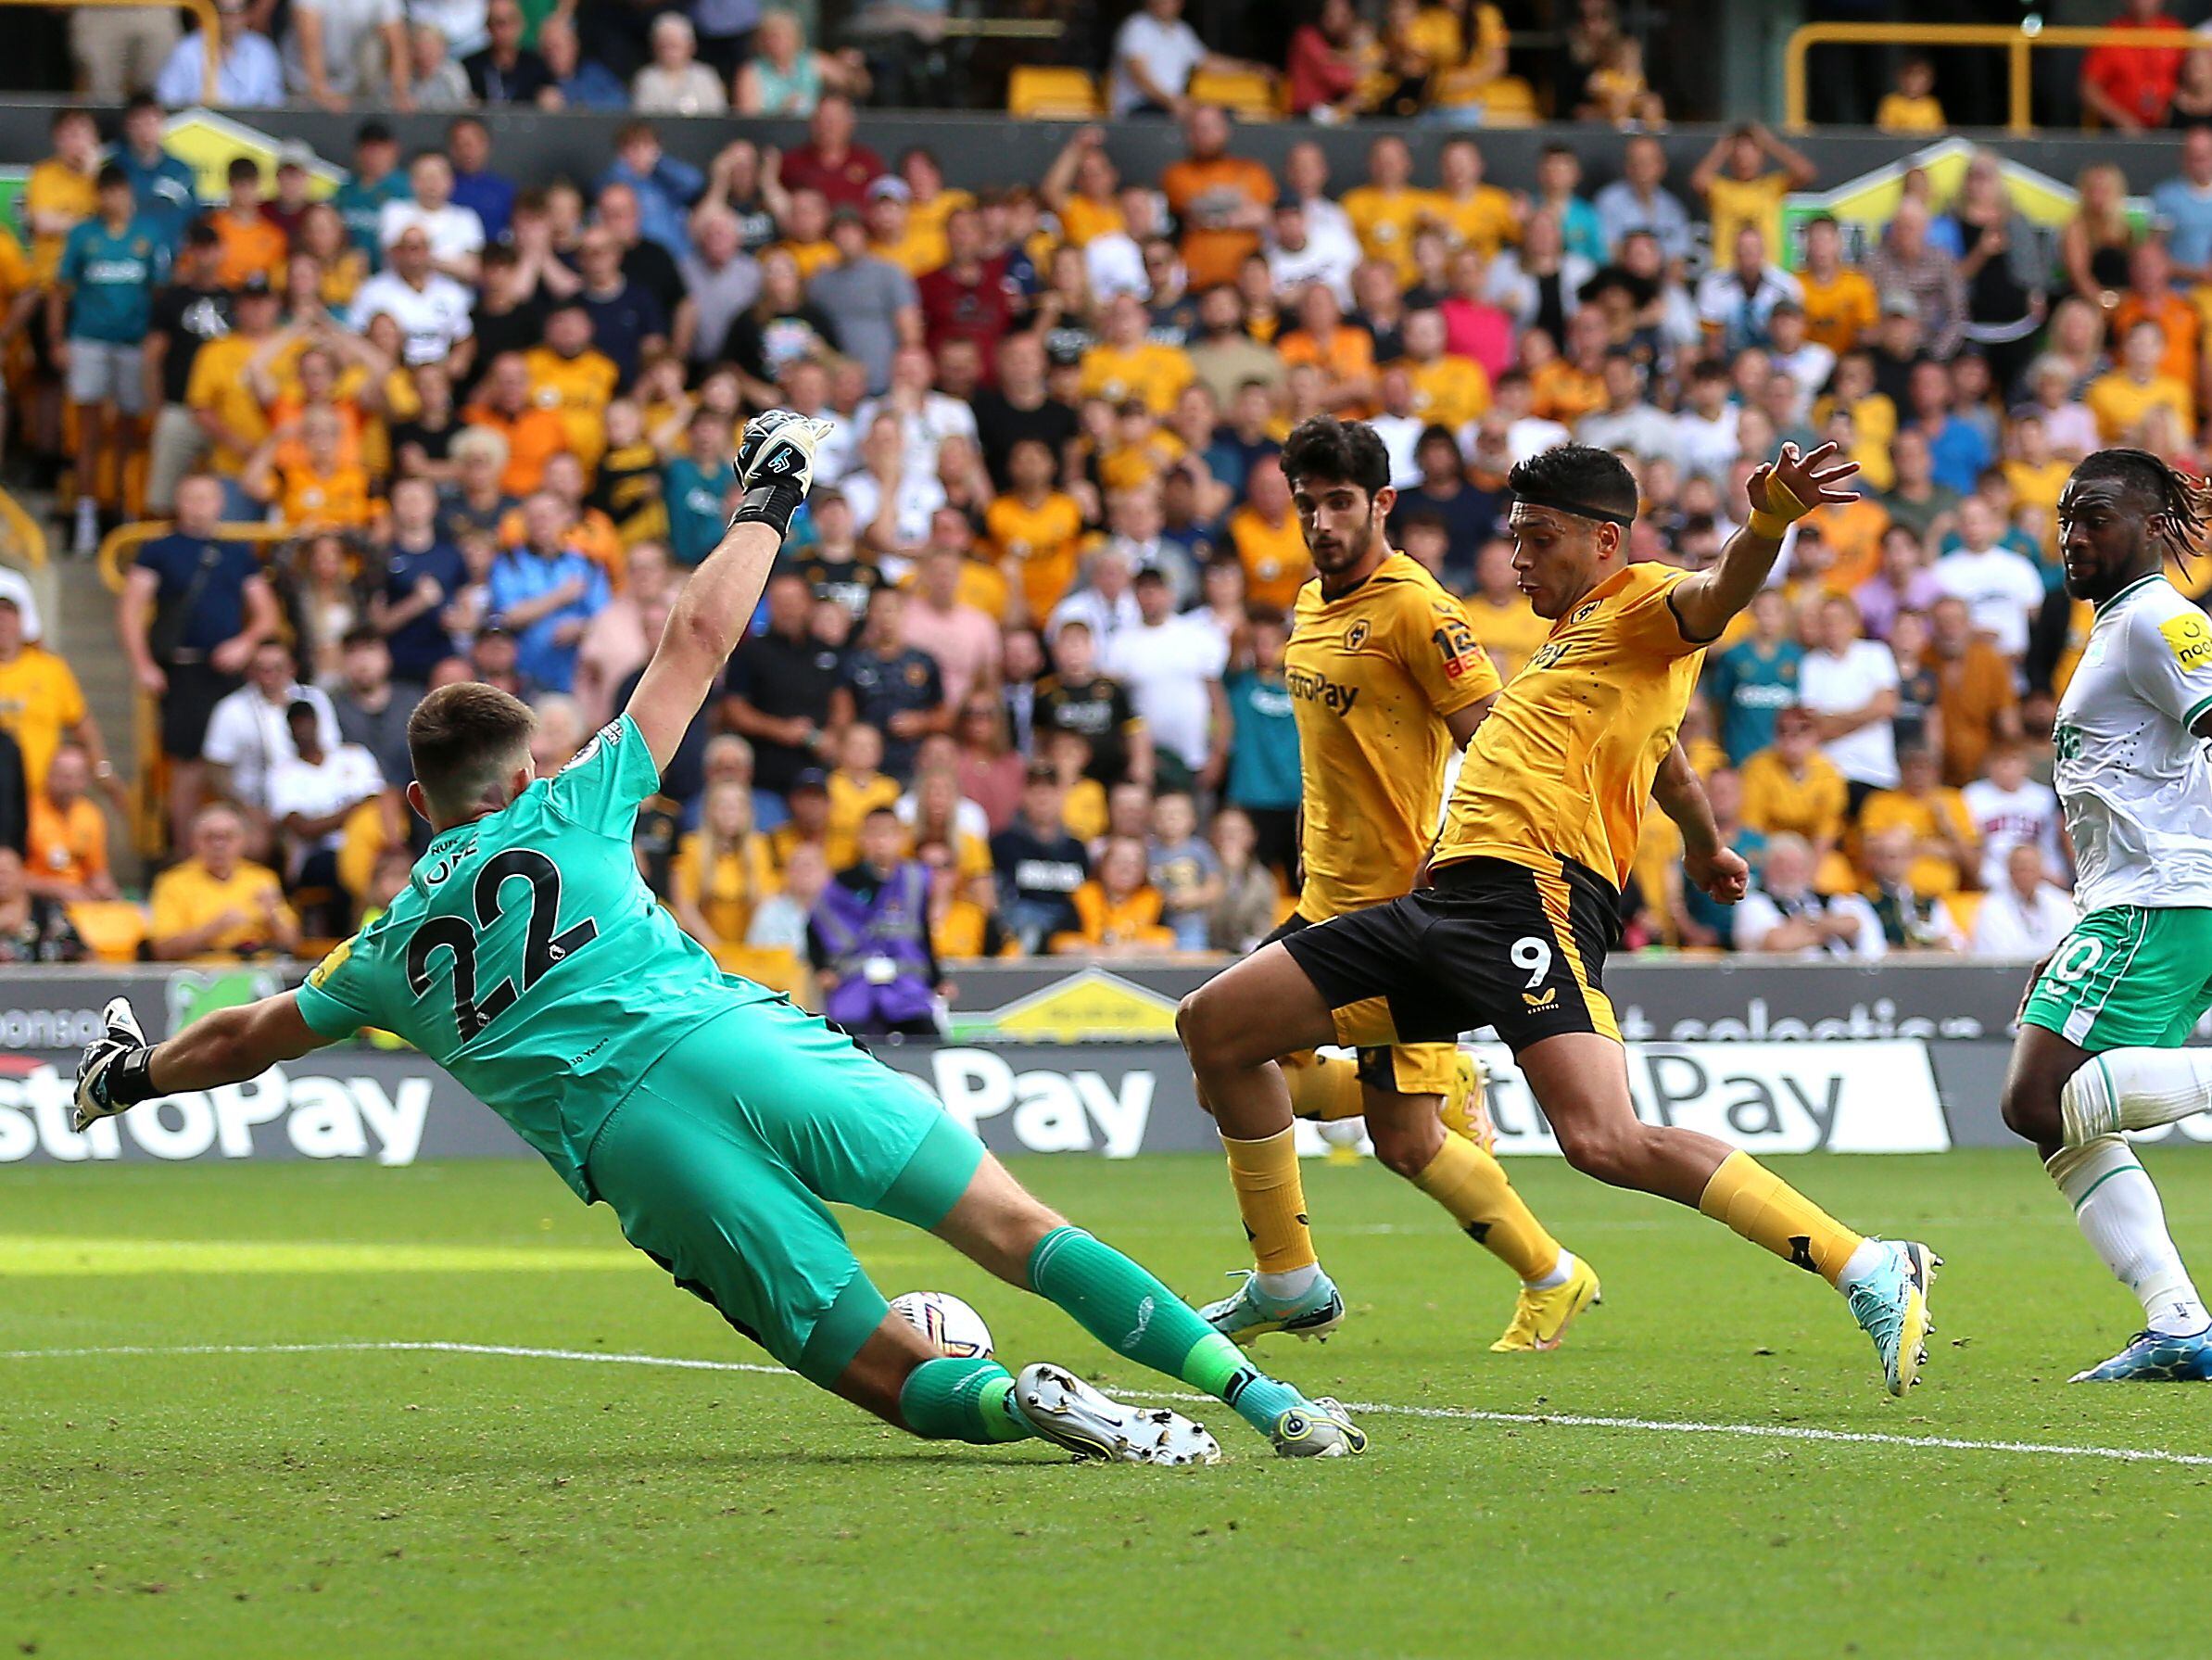 Wolves striker Raul Jimenez could return next week claims father